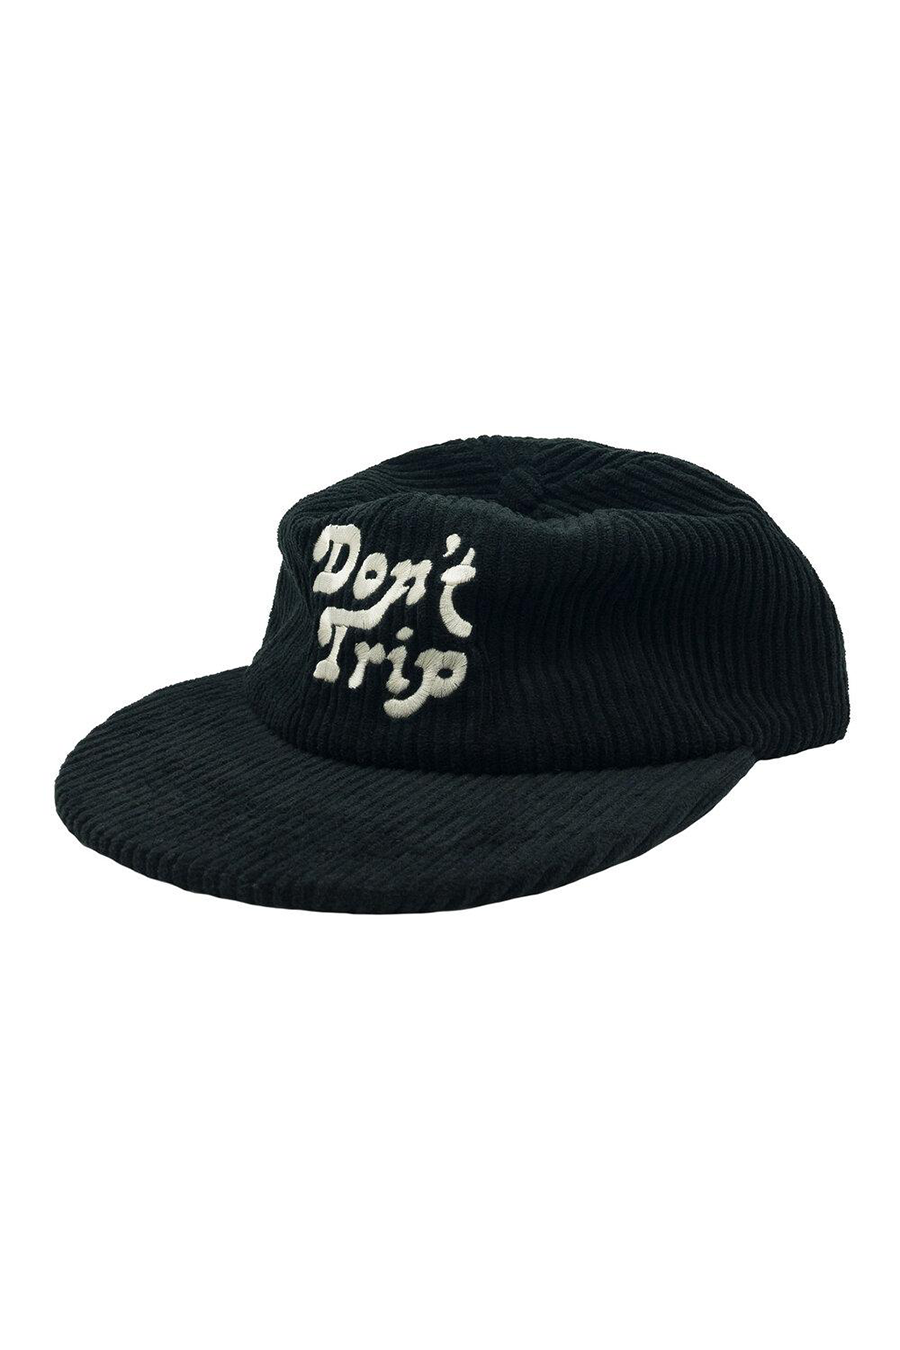 Don't Trip Fat Corduroy Hat | Black - Main Image Number 1 of 2